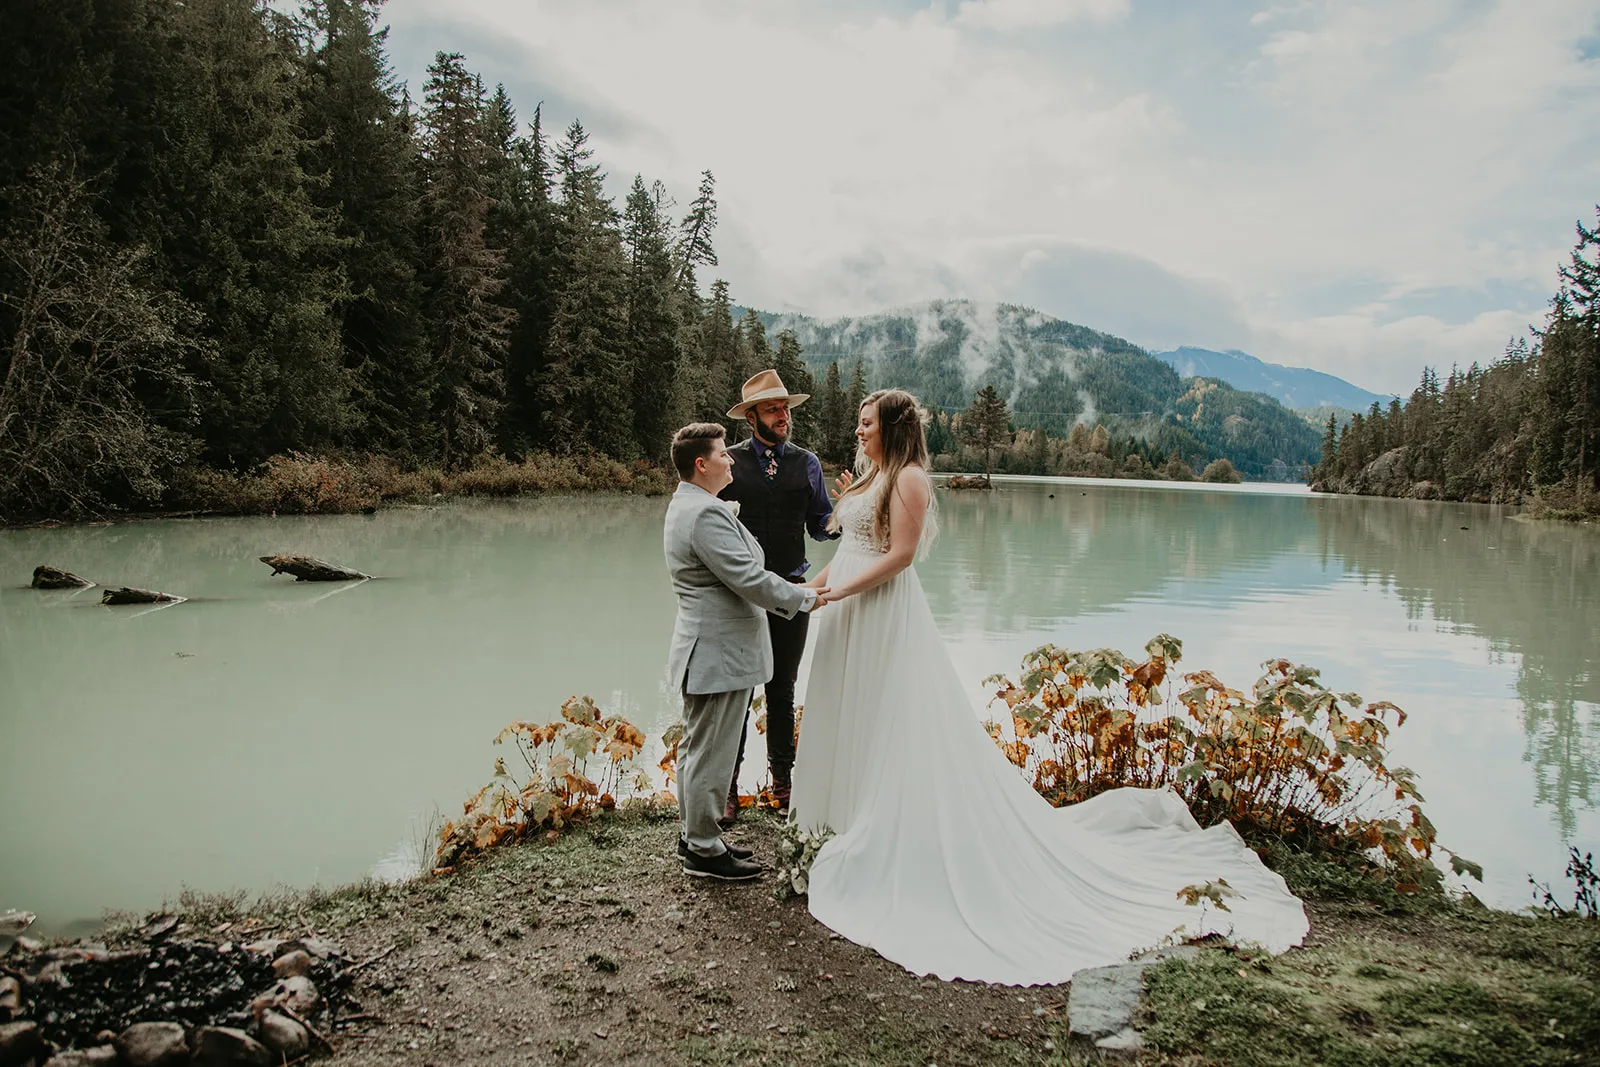 Young Hip & Married elopement + photography in Whistler, BC